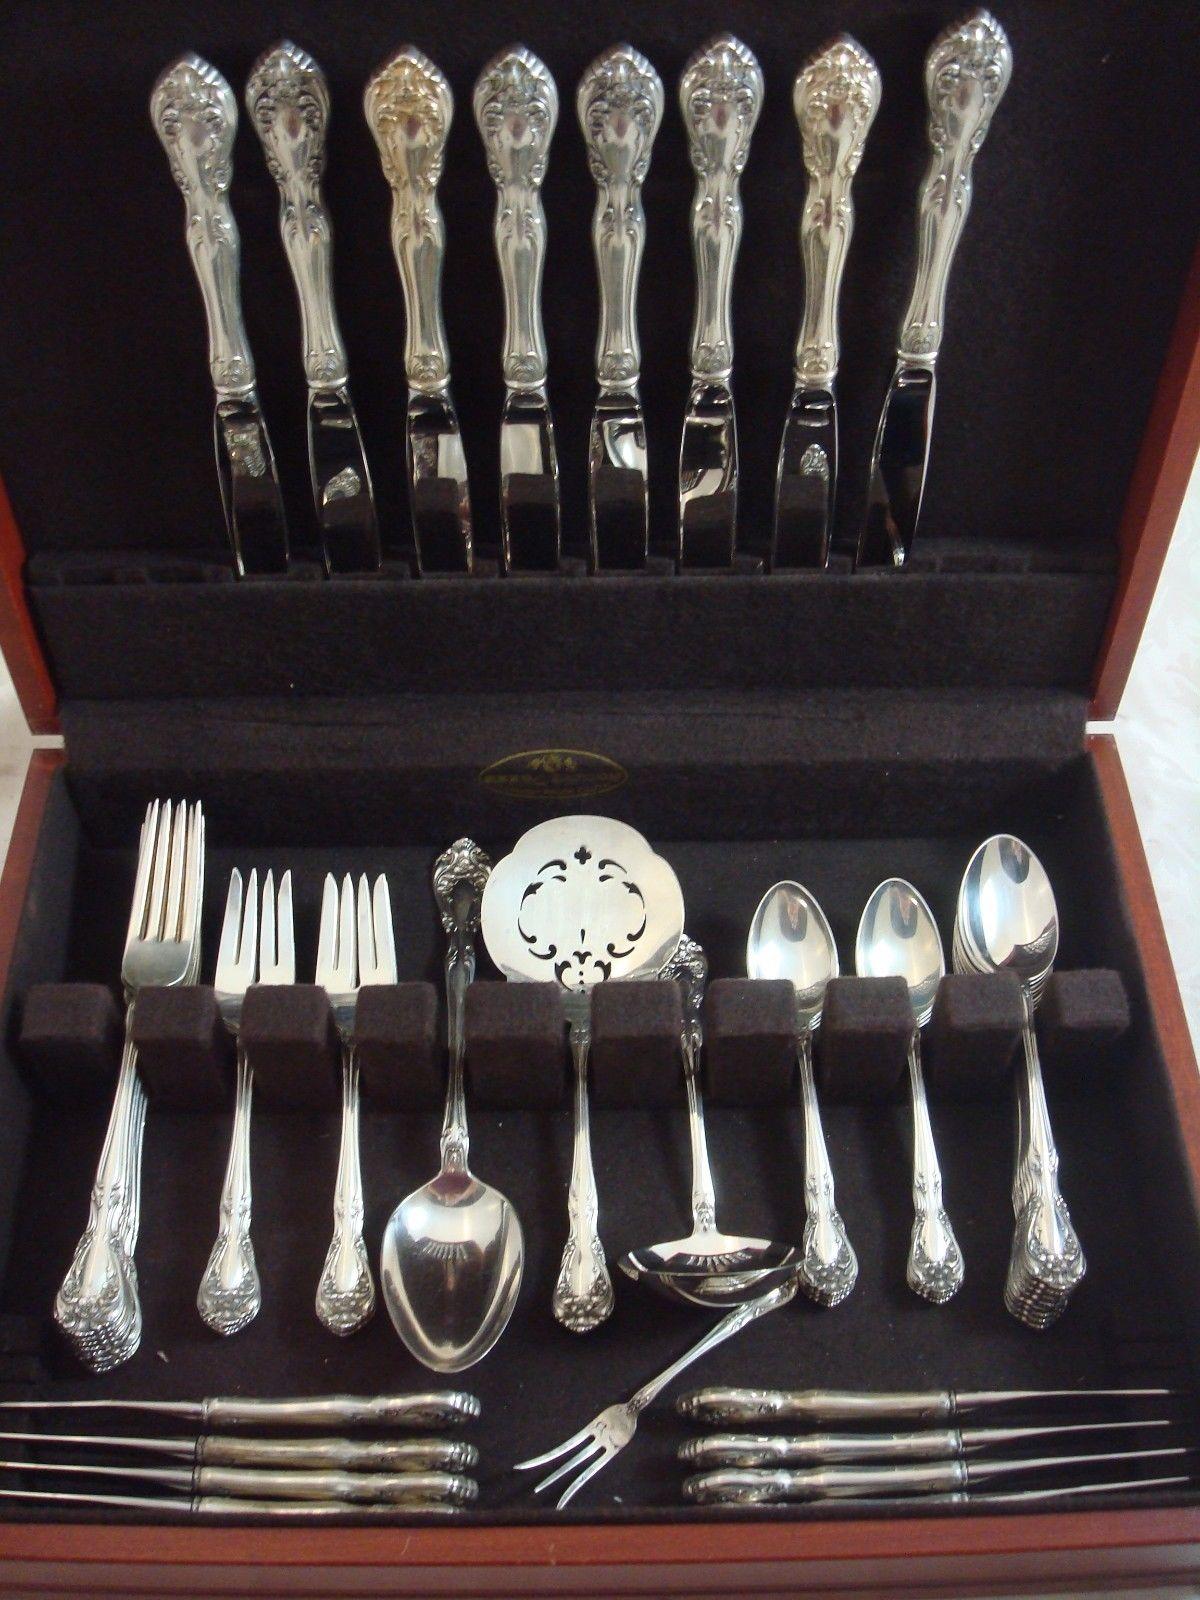 Wonderful Chateau Rose by Alvin sterling silver dinner size flatware set - 52 pieces. This set includes:

8 dinner size knives, 9 5/8